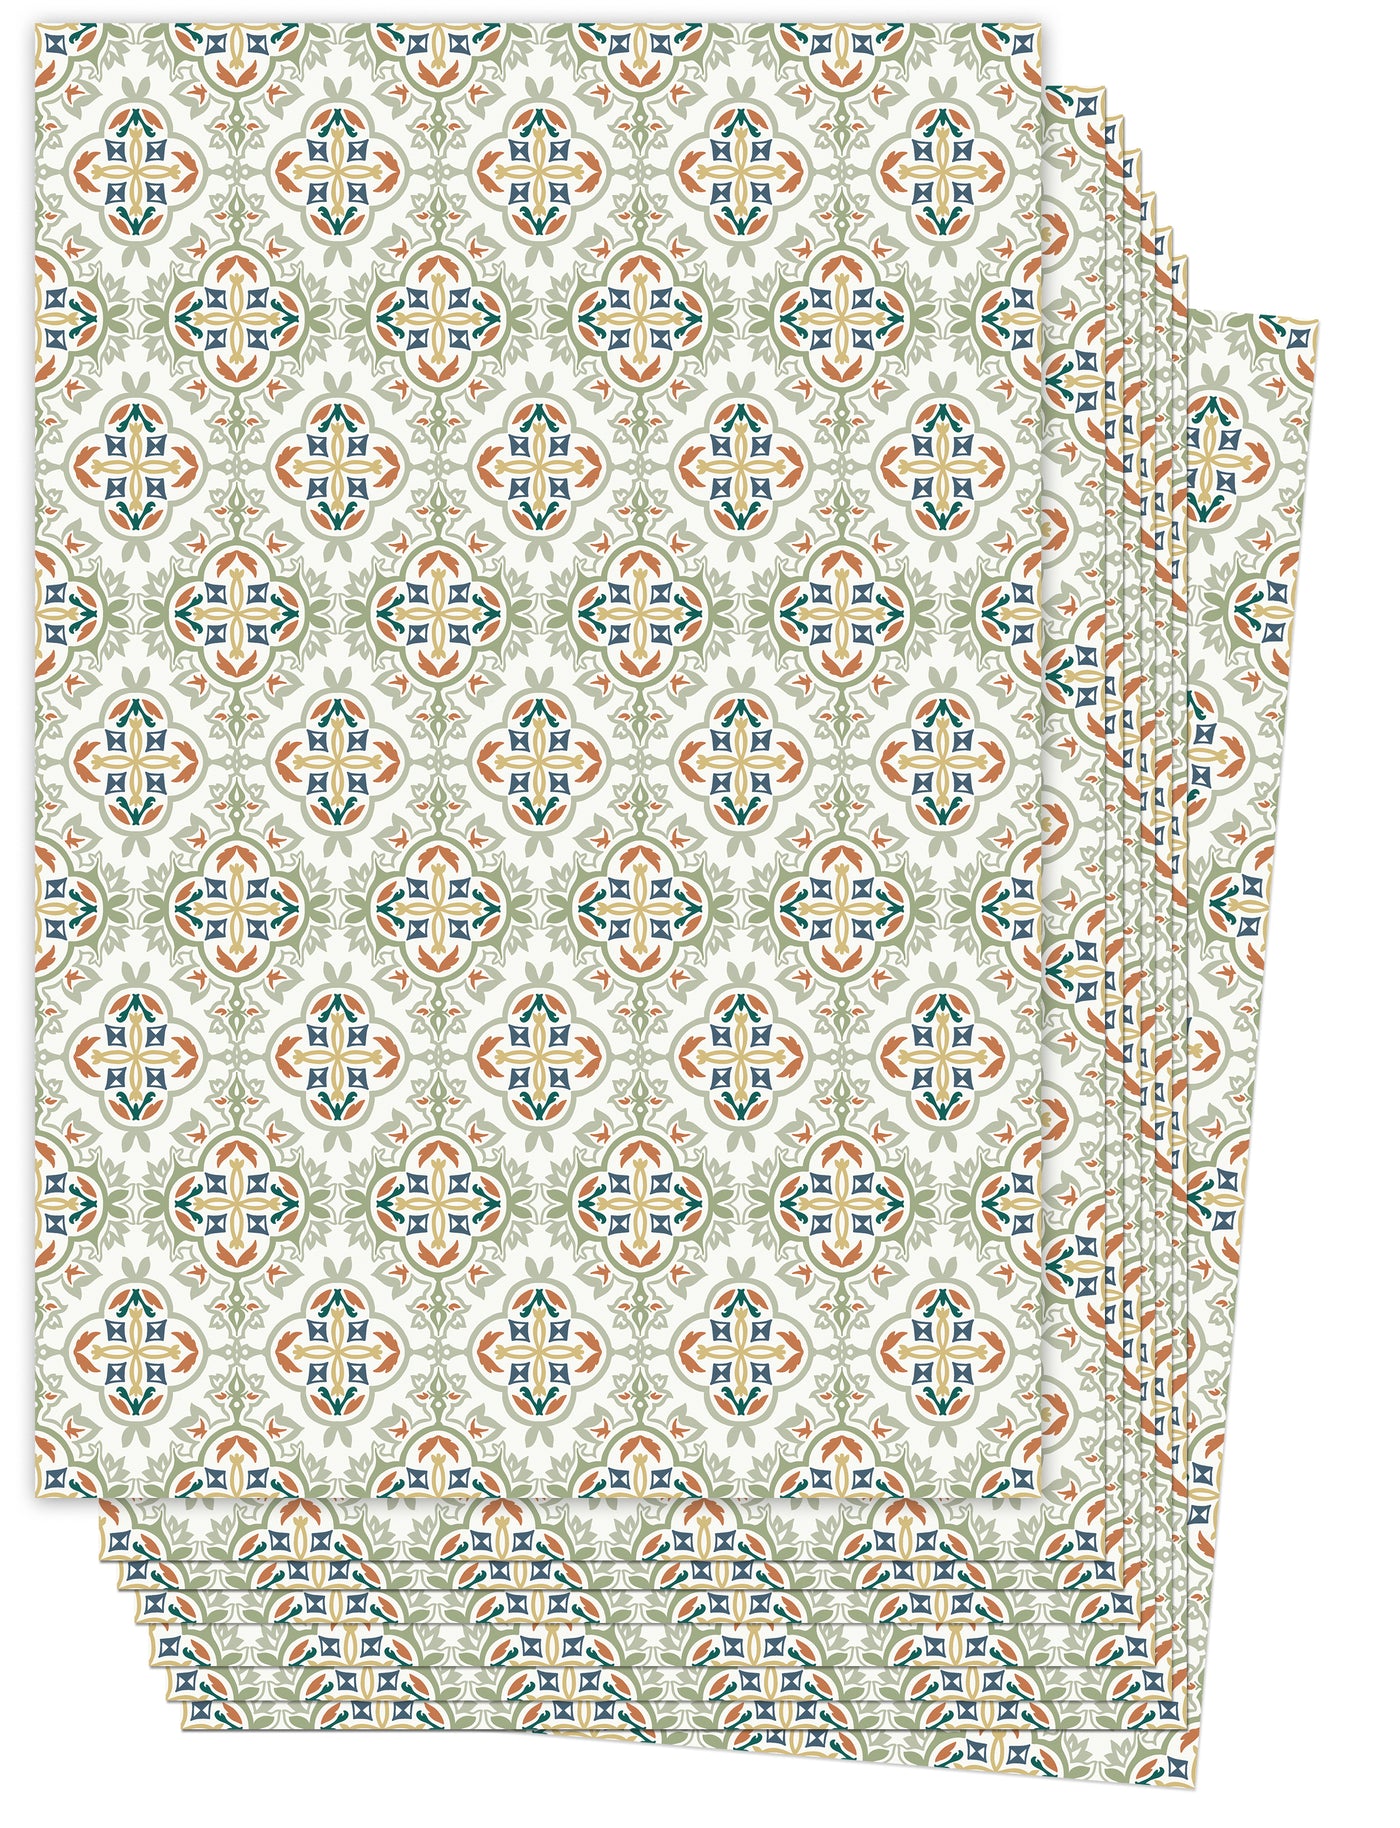 Cafe Tile Wall Wallpaper Sheets by Filasophie